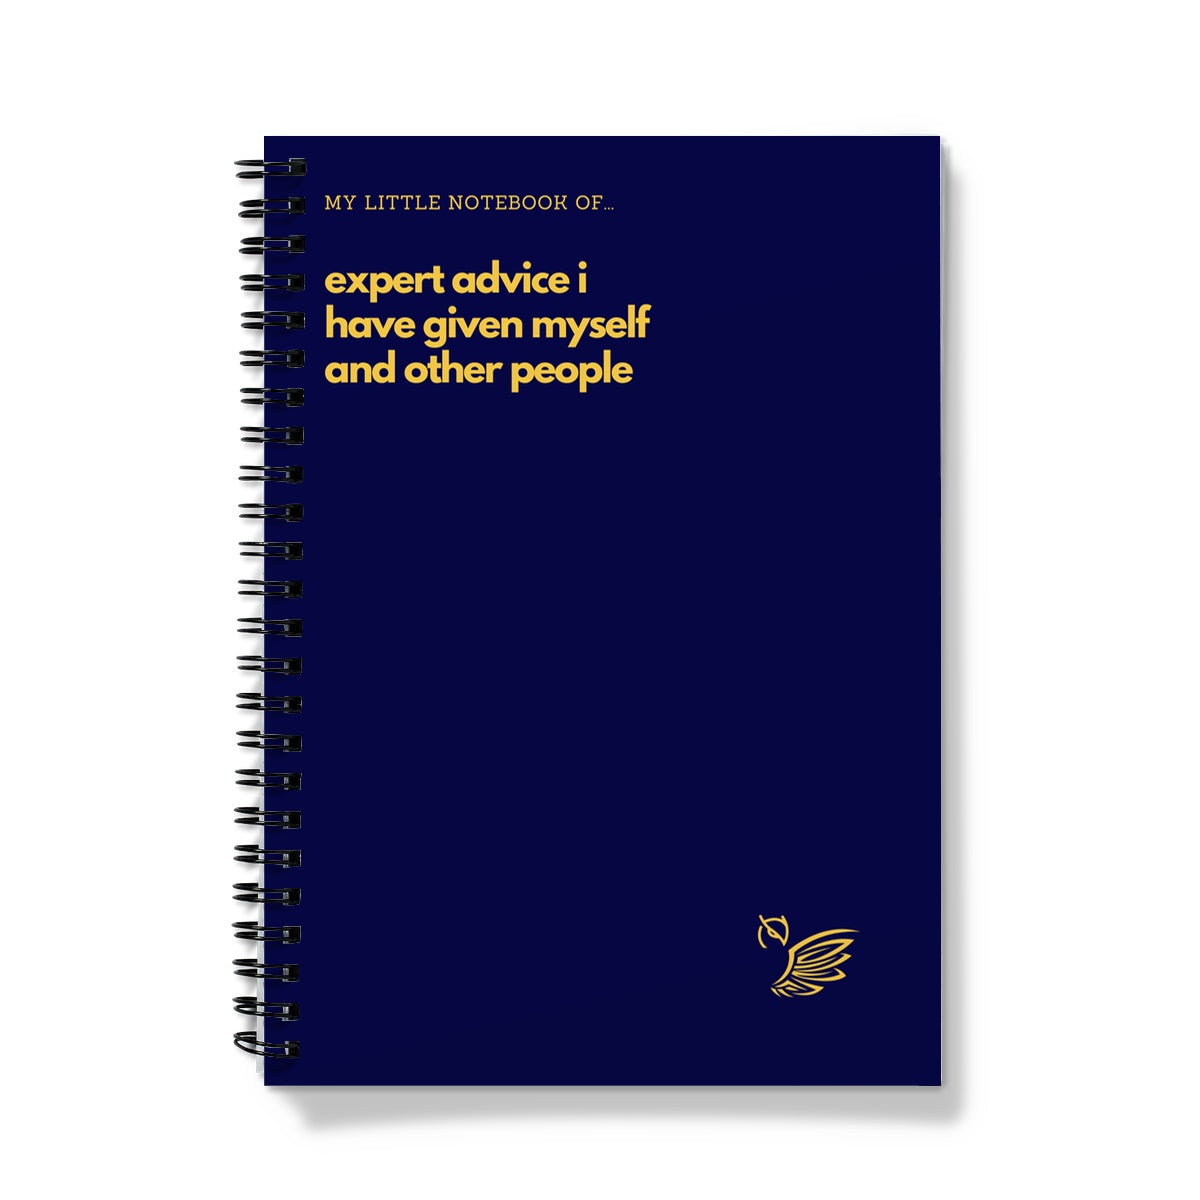 My Little Notebook Of... Expert Advice I Have Given Myself And Other People Notebook